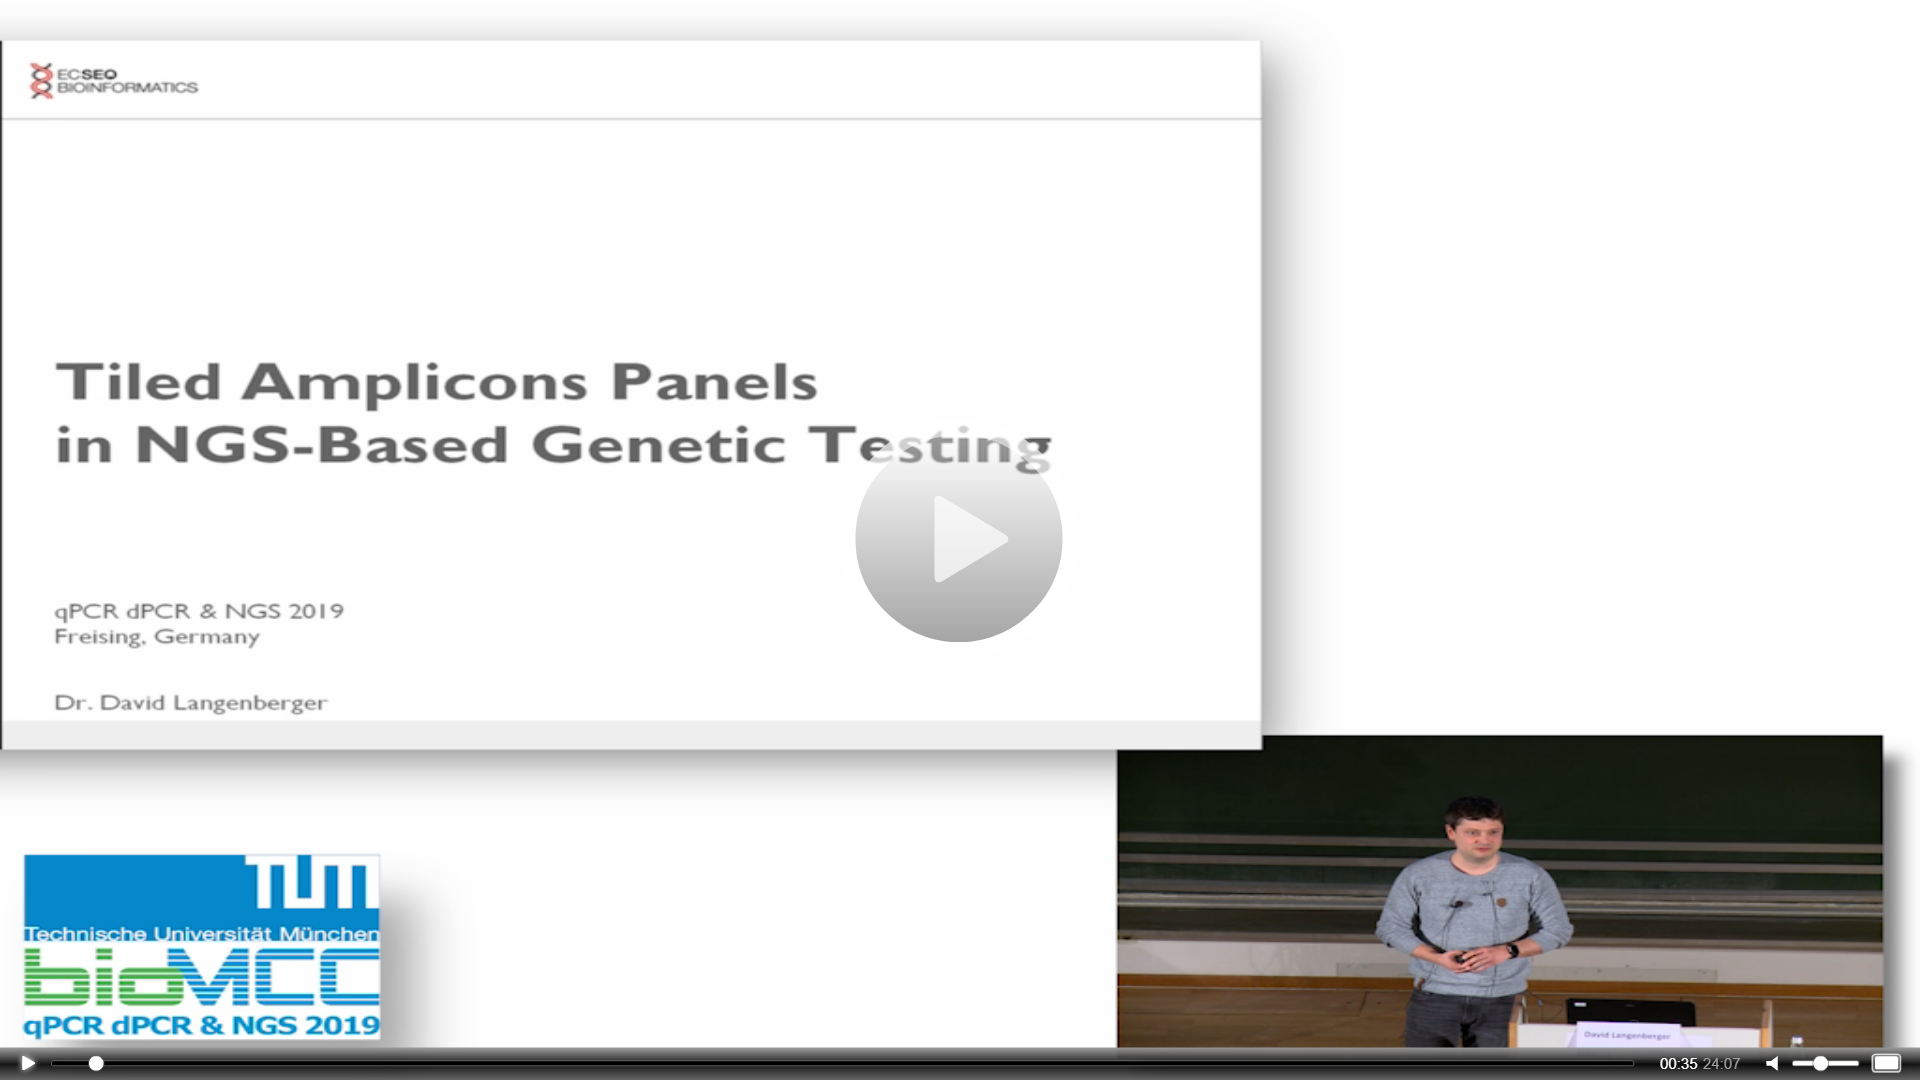 Tiled Amplicons Panels in NGS-Based Genetic Testing